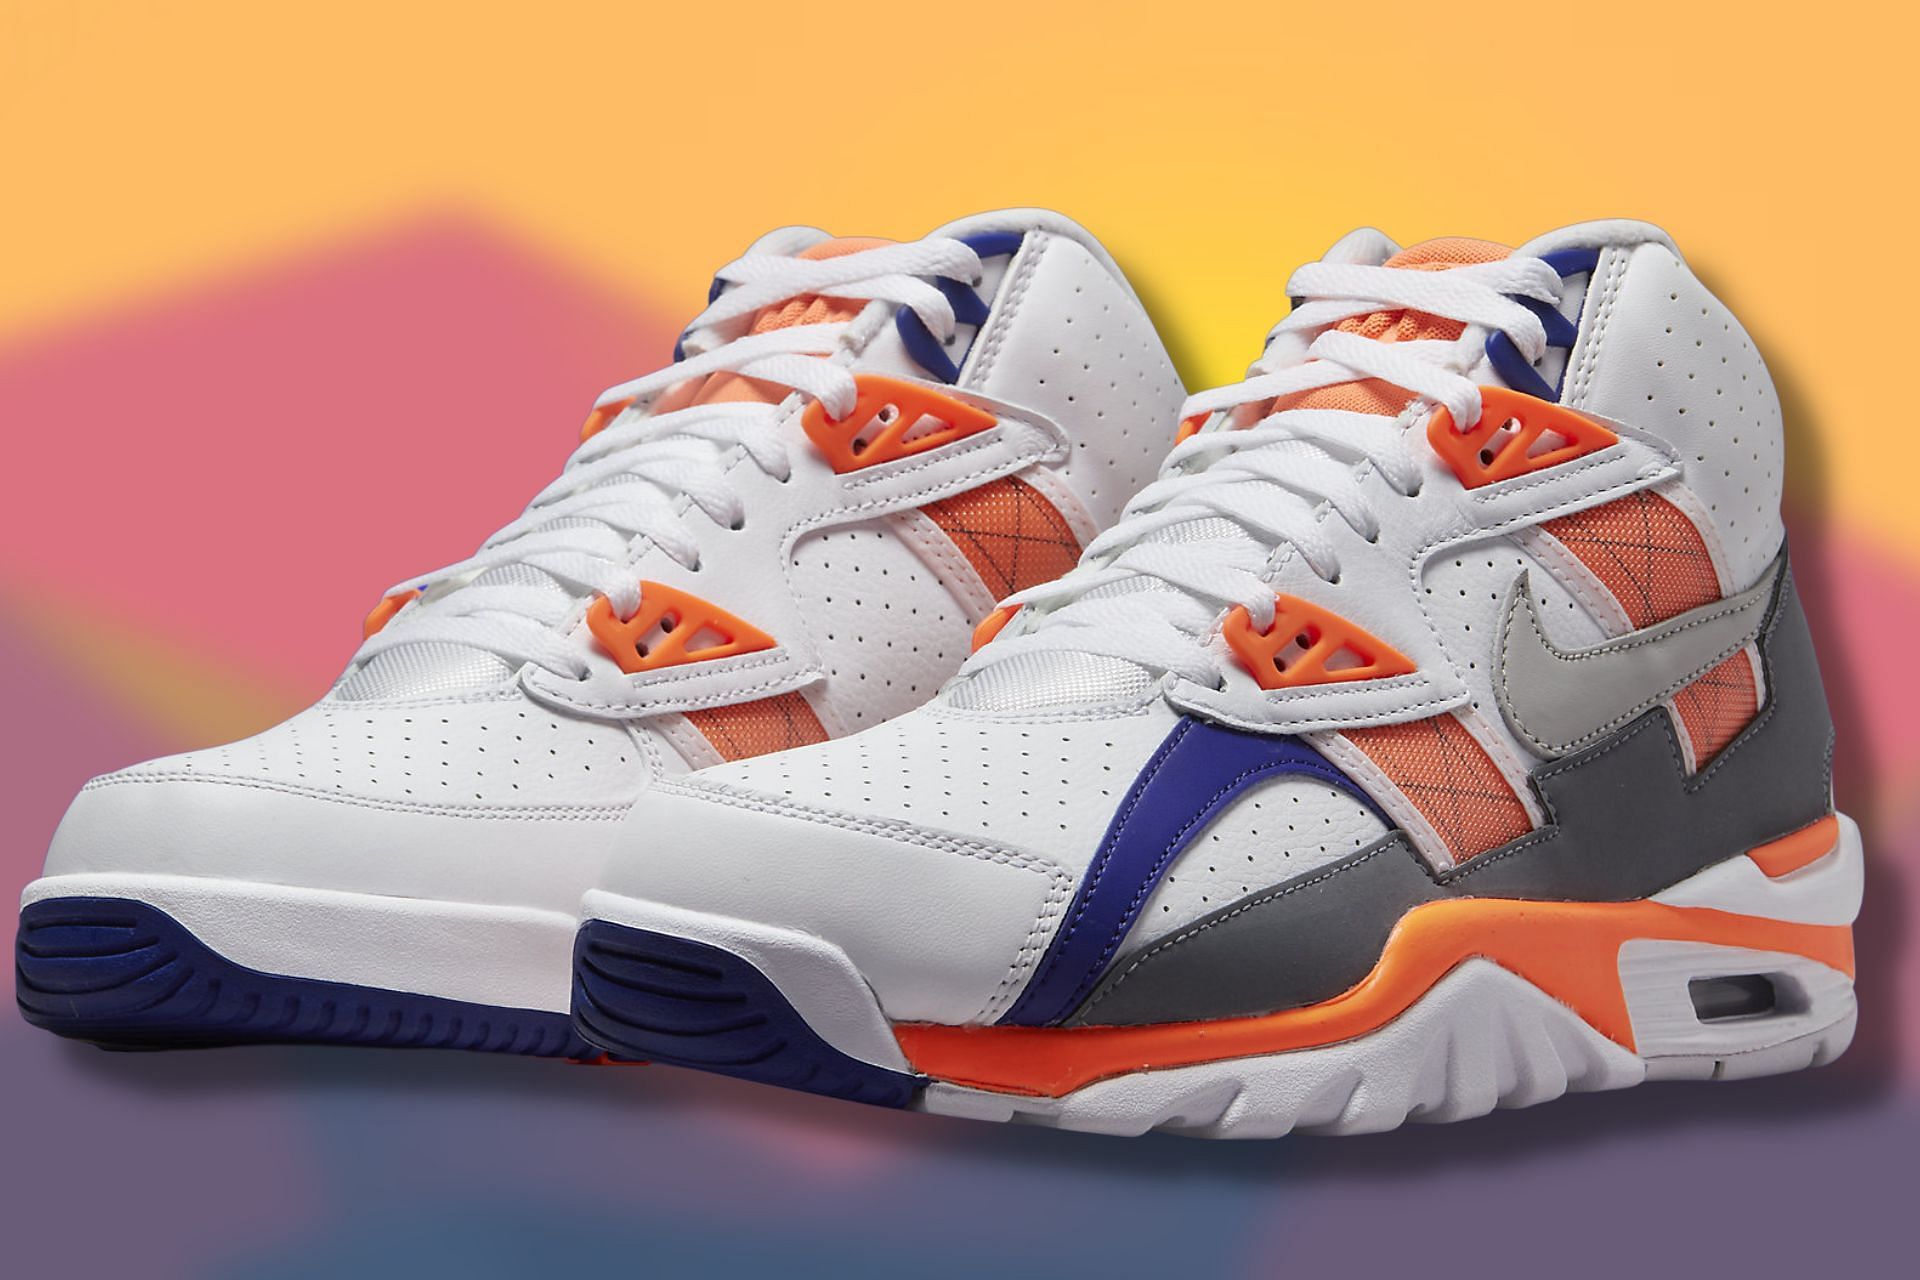 Where to buy Bo Jackson's Nike Air Trainer SC High “Auburn” shoes? Price,  release date, and more details explored